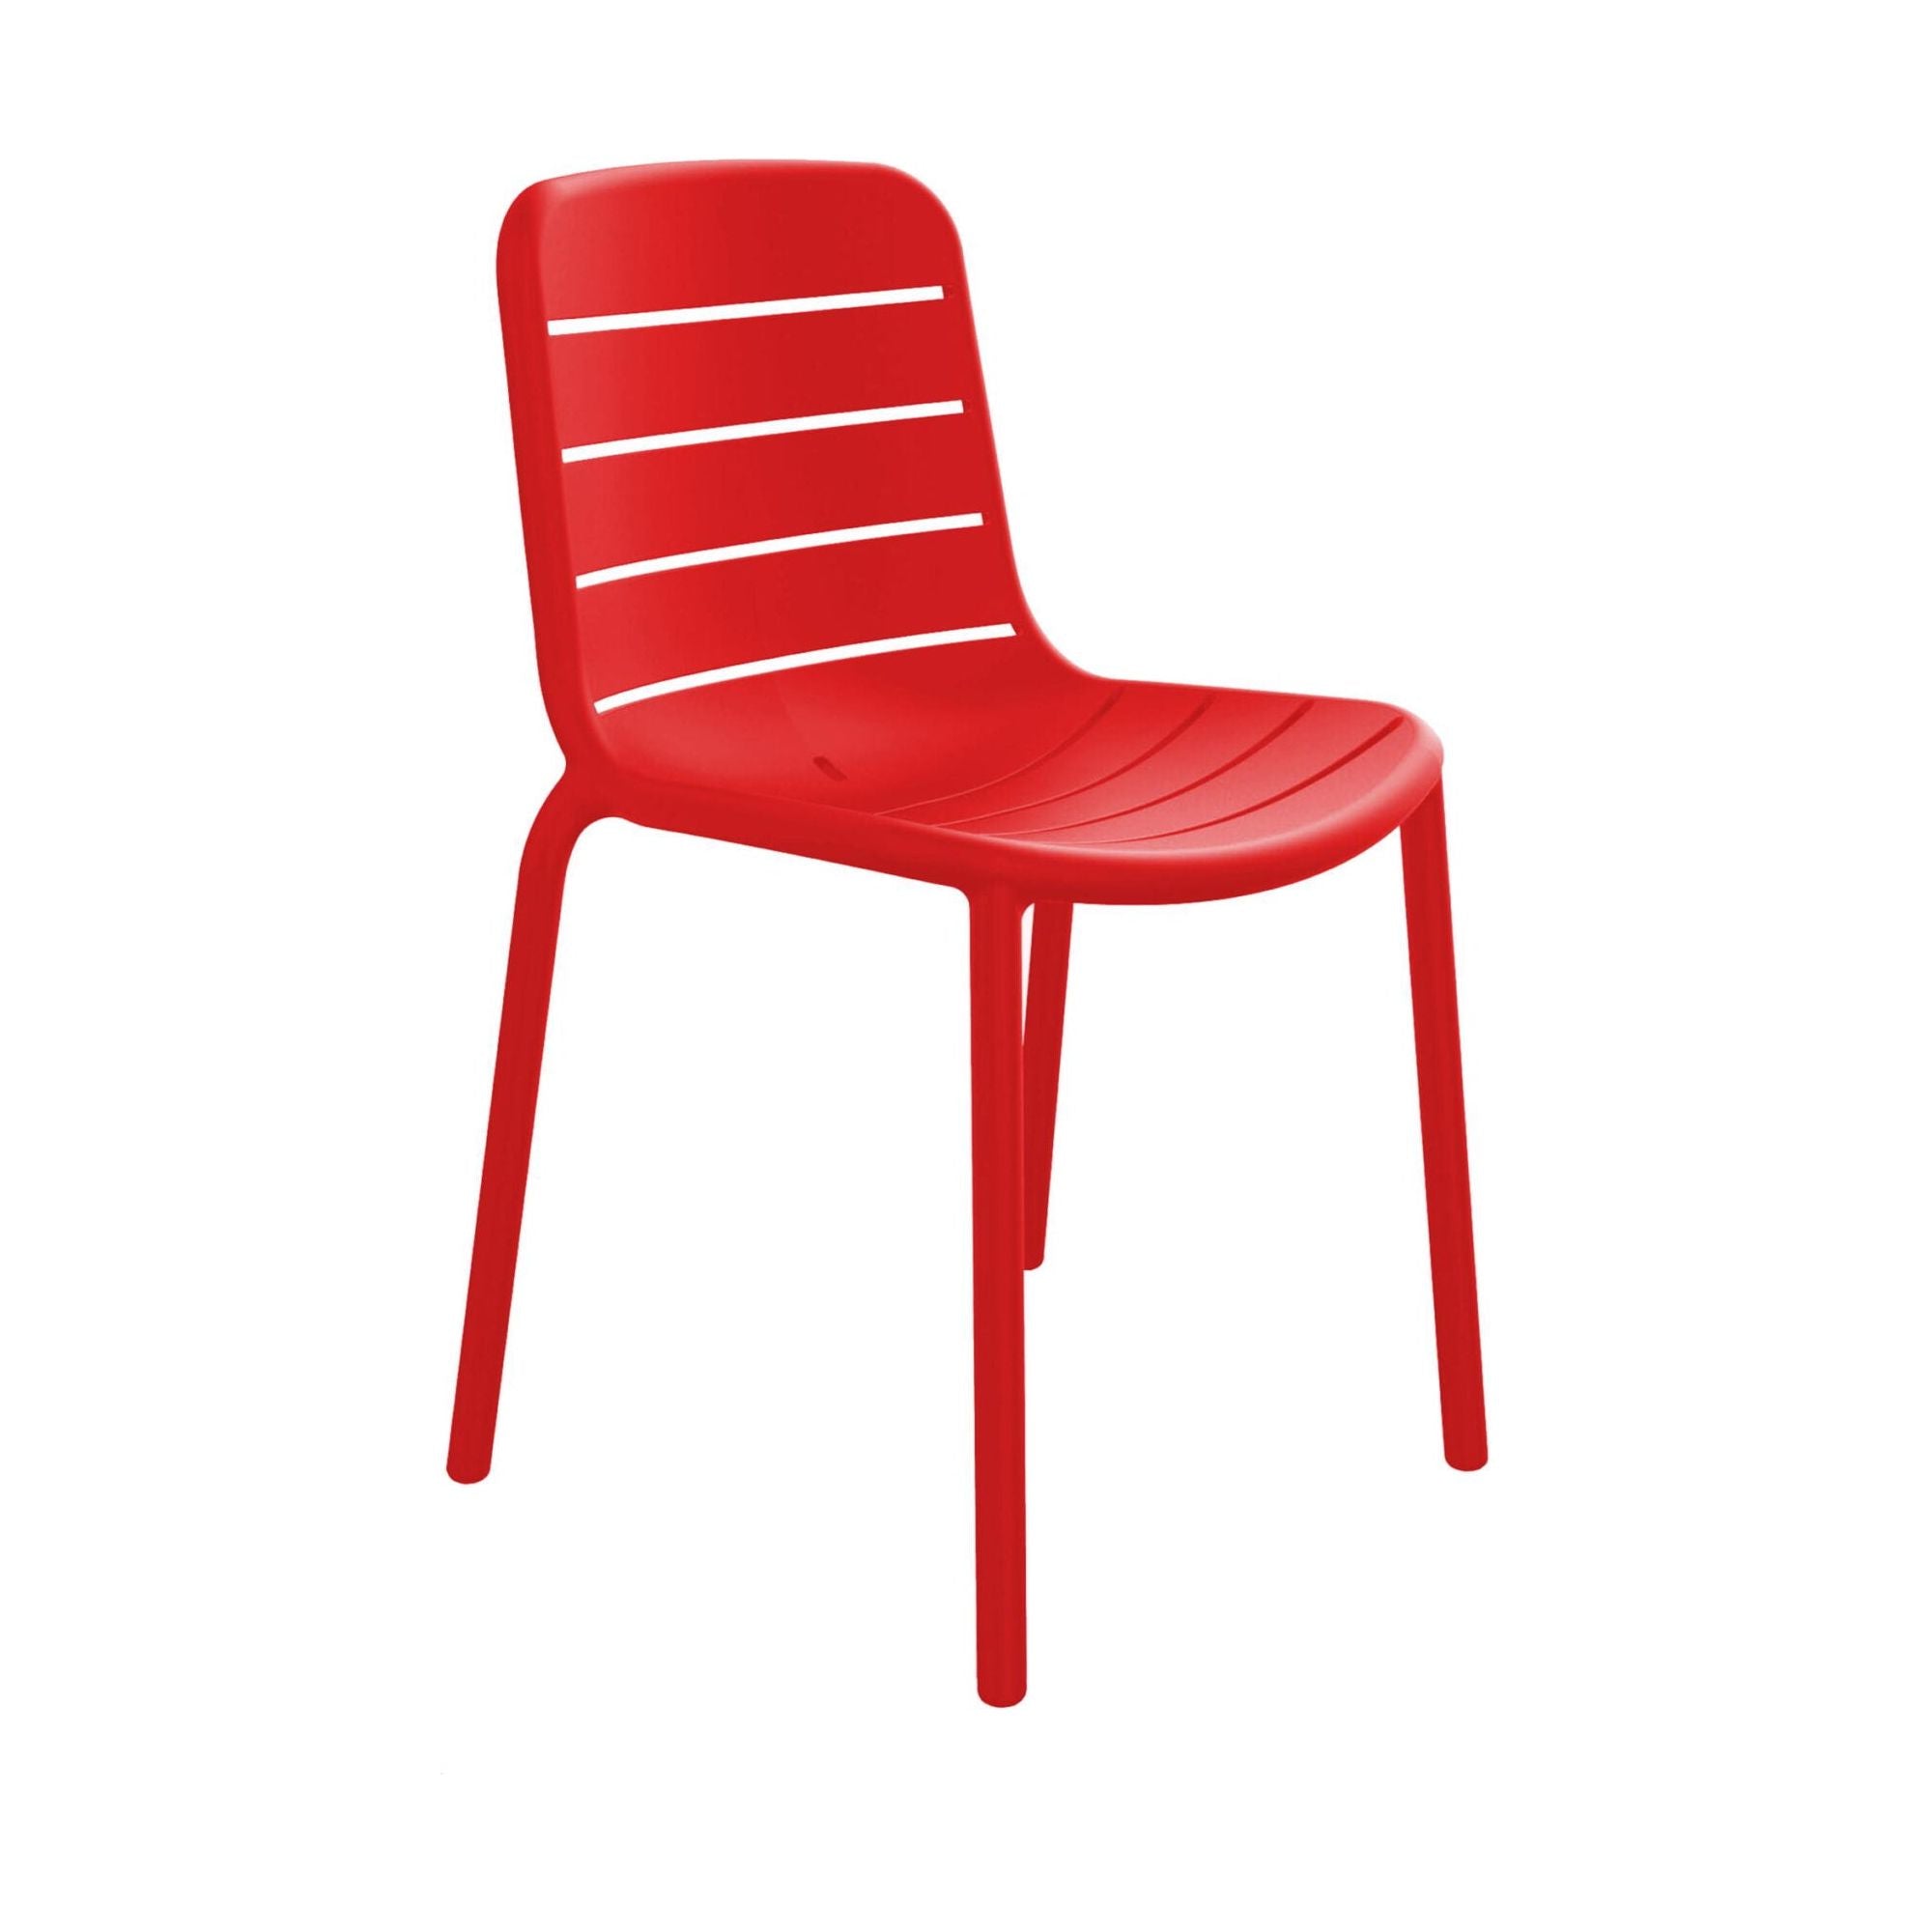 Resol Gina chair inside, red outside